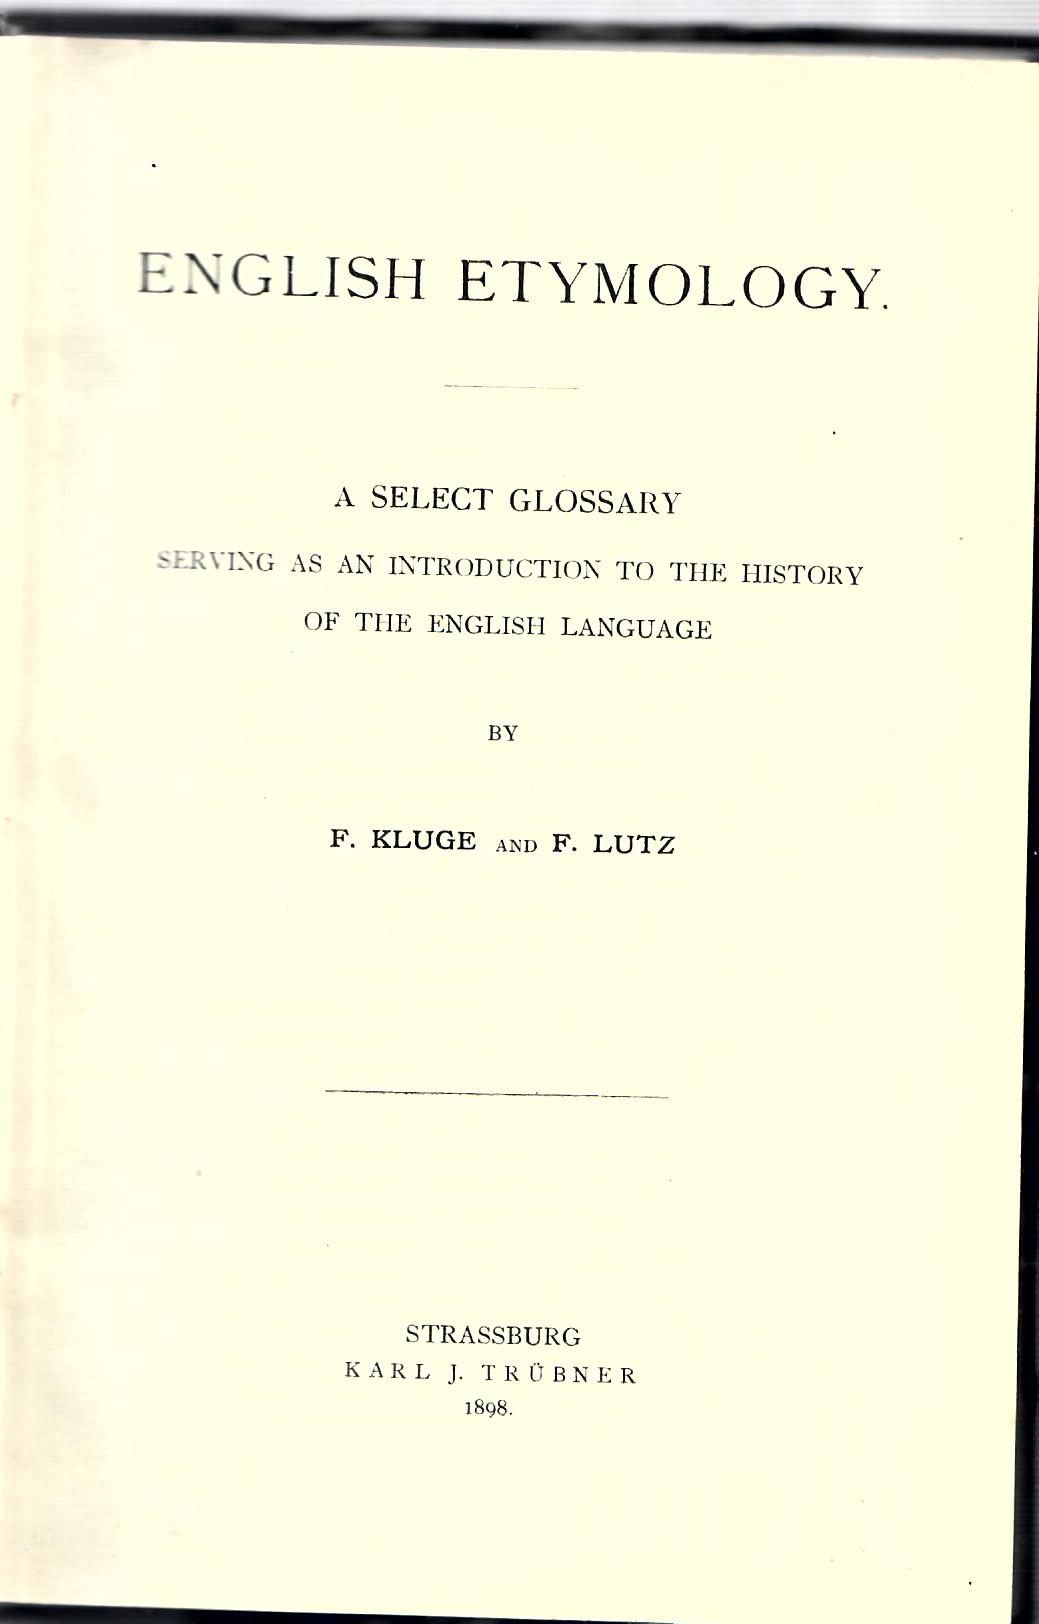 KLUGE, F. and F. LUTZ   : English Etymology. A select glossary serving as an introduction to the history of the English language